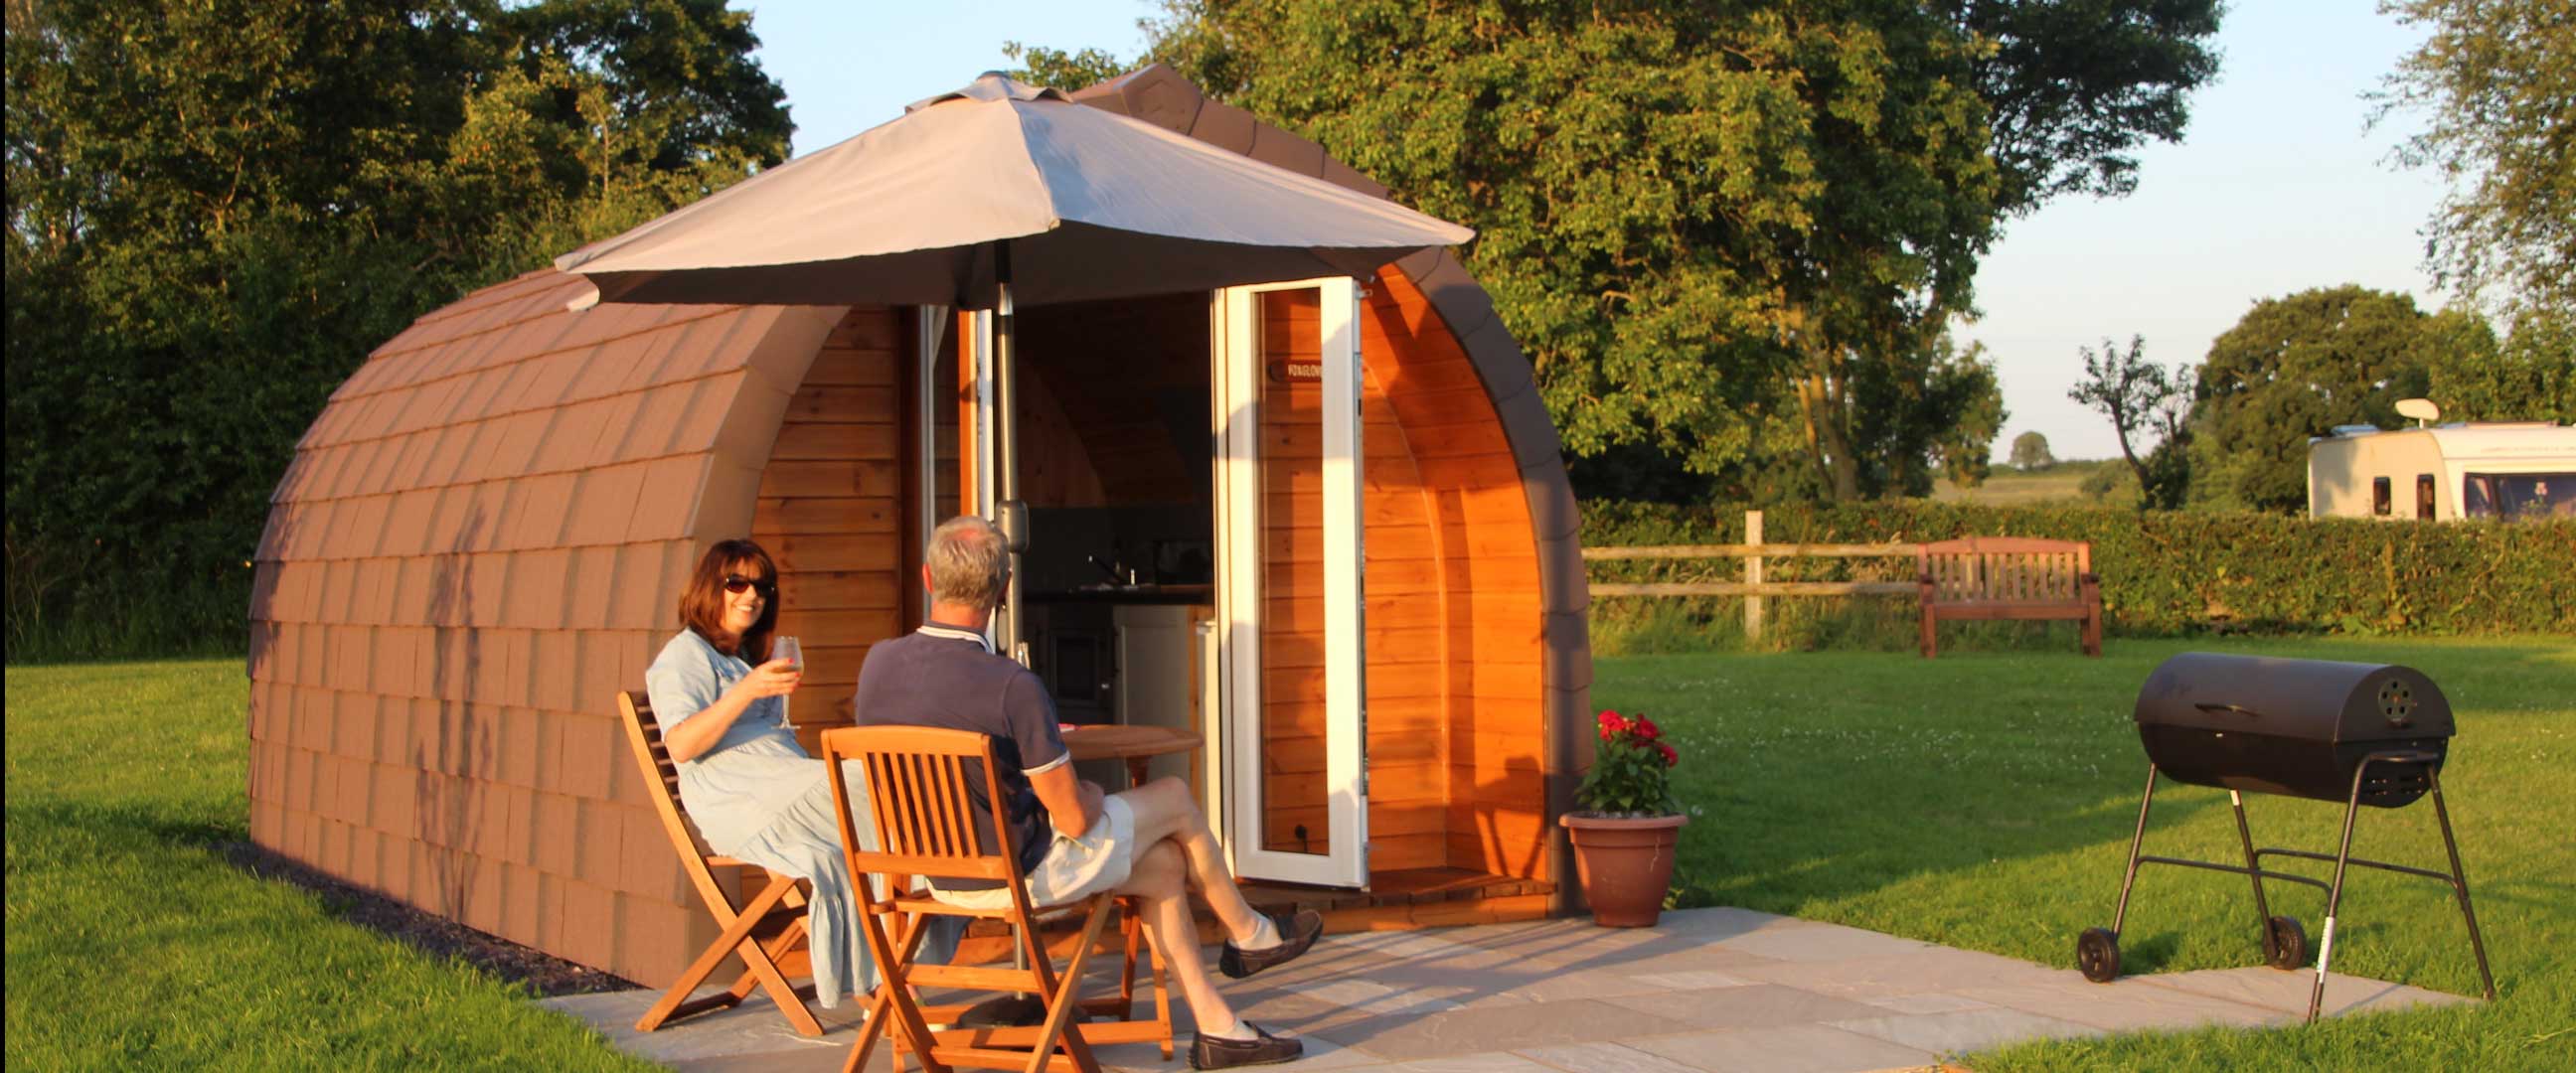 Glamping pods at Bradley Hall Rural Escapes